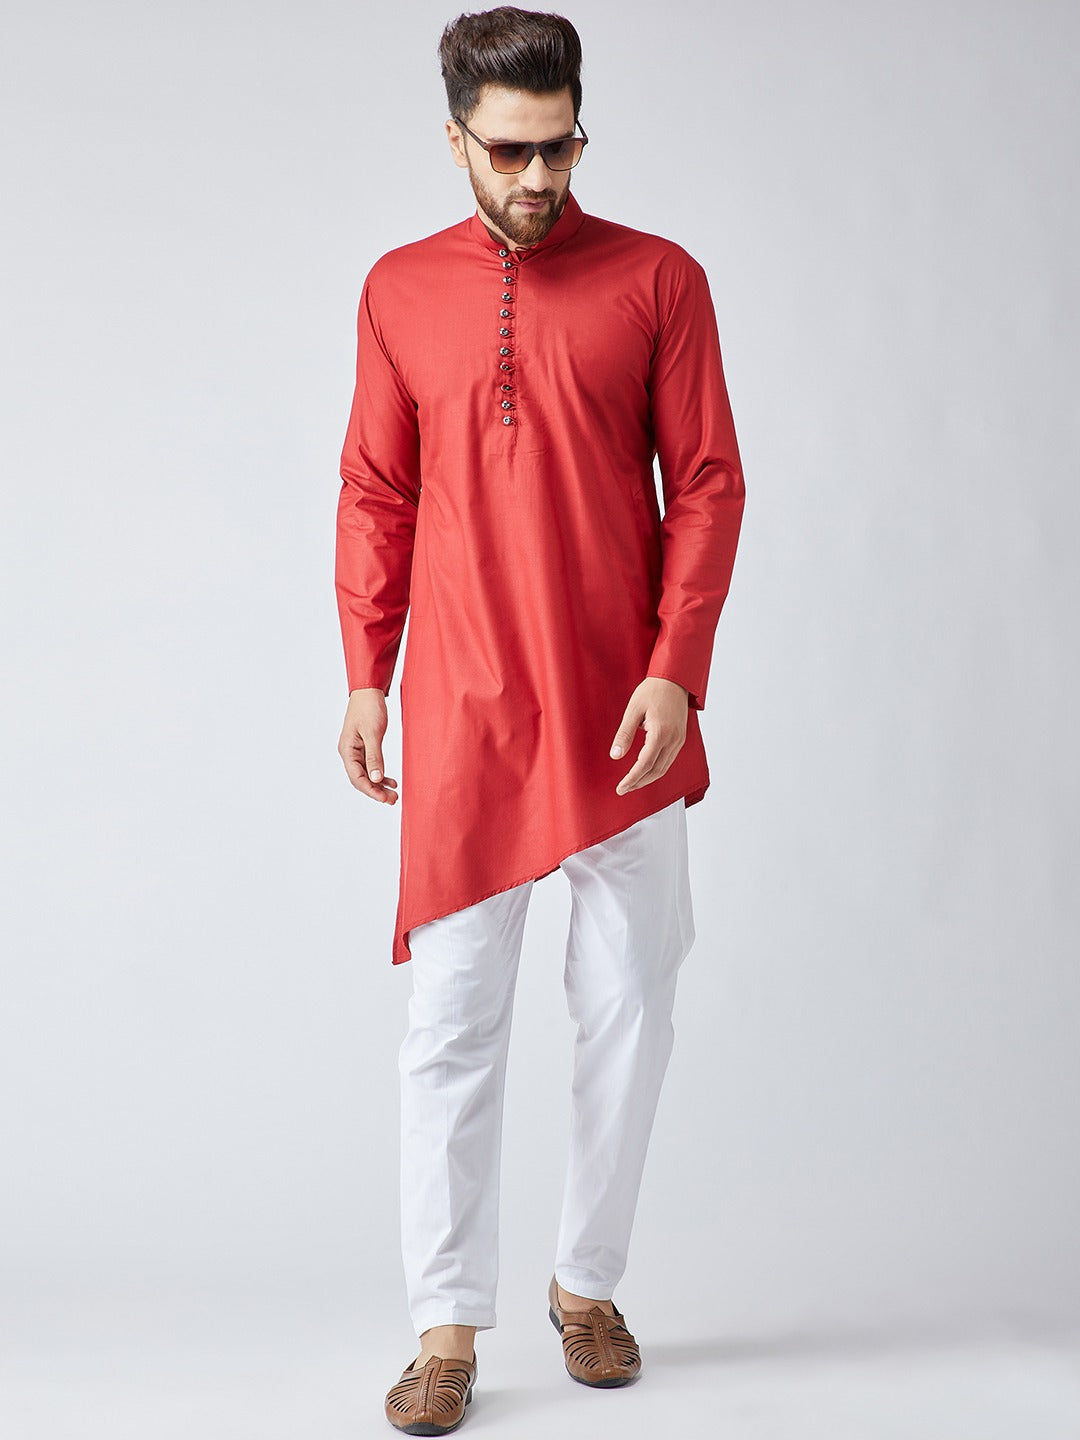 White Solid Pajamas Indian Clothing in Denver, CO, Aurora, CO, Boulder, CO, Fort Collins, CO, Colorado Springs, CO, Parker, CO, Highlands Ranch, CO, Cherry Creek, CO, Centennial, CO, and Longmont, CO. NATIONWIDE SHIPPING USA- India Fashion X